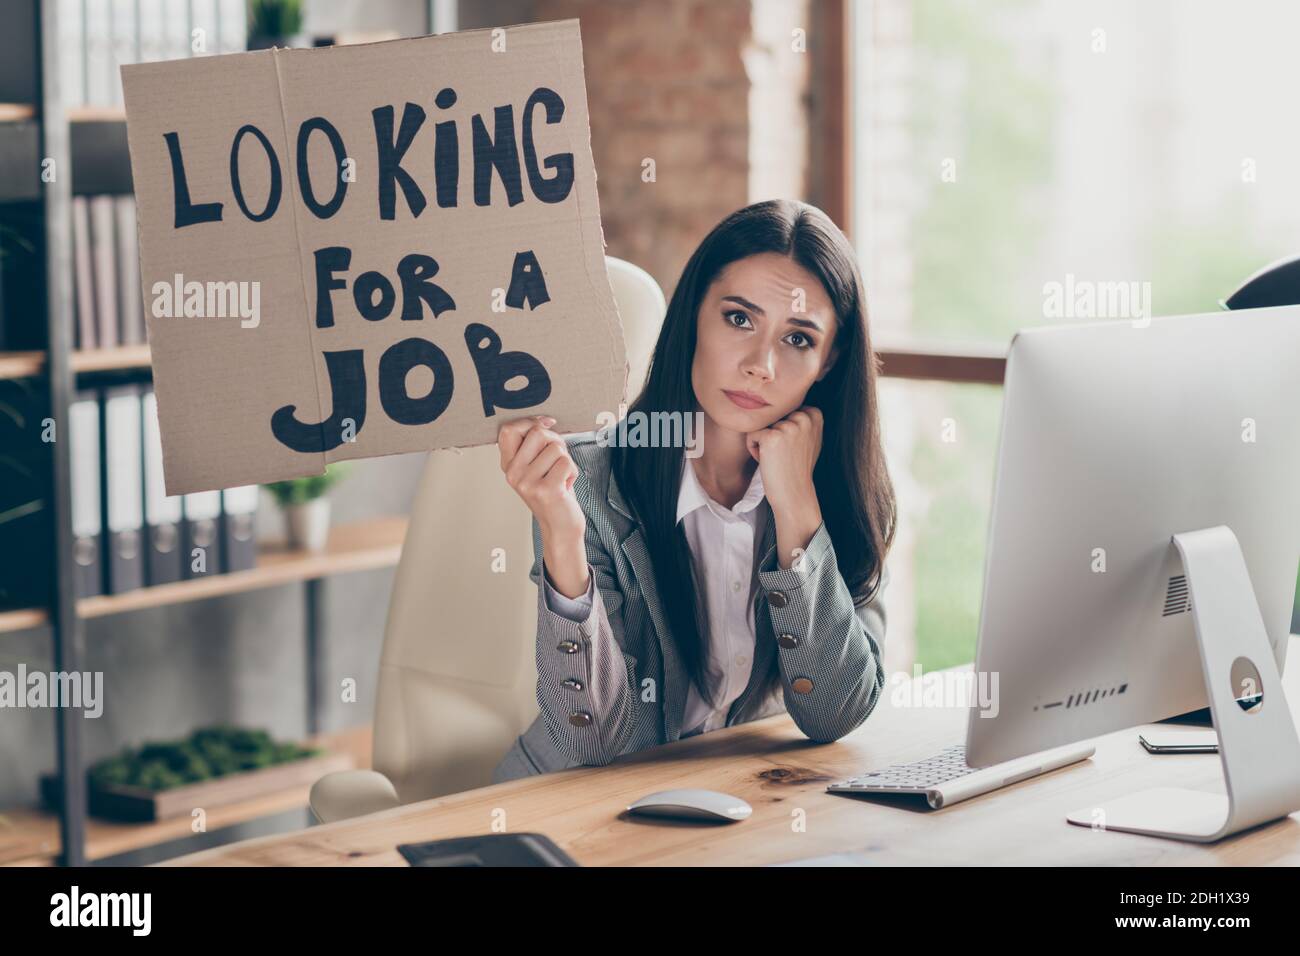 Photo of sad frustrated upset girl marketer financier agent sit desk hold cardboard text look for job have dismissed from company crisis recession Stock Photo